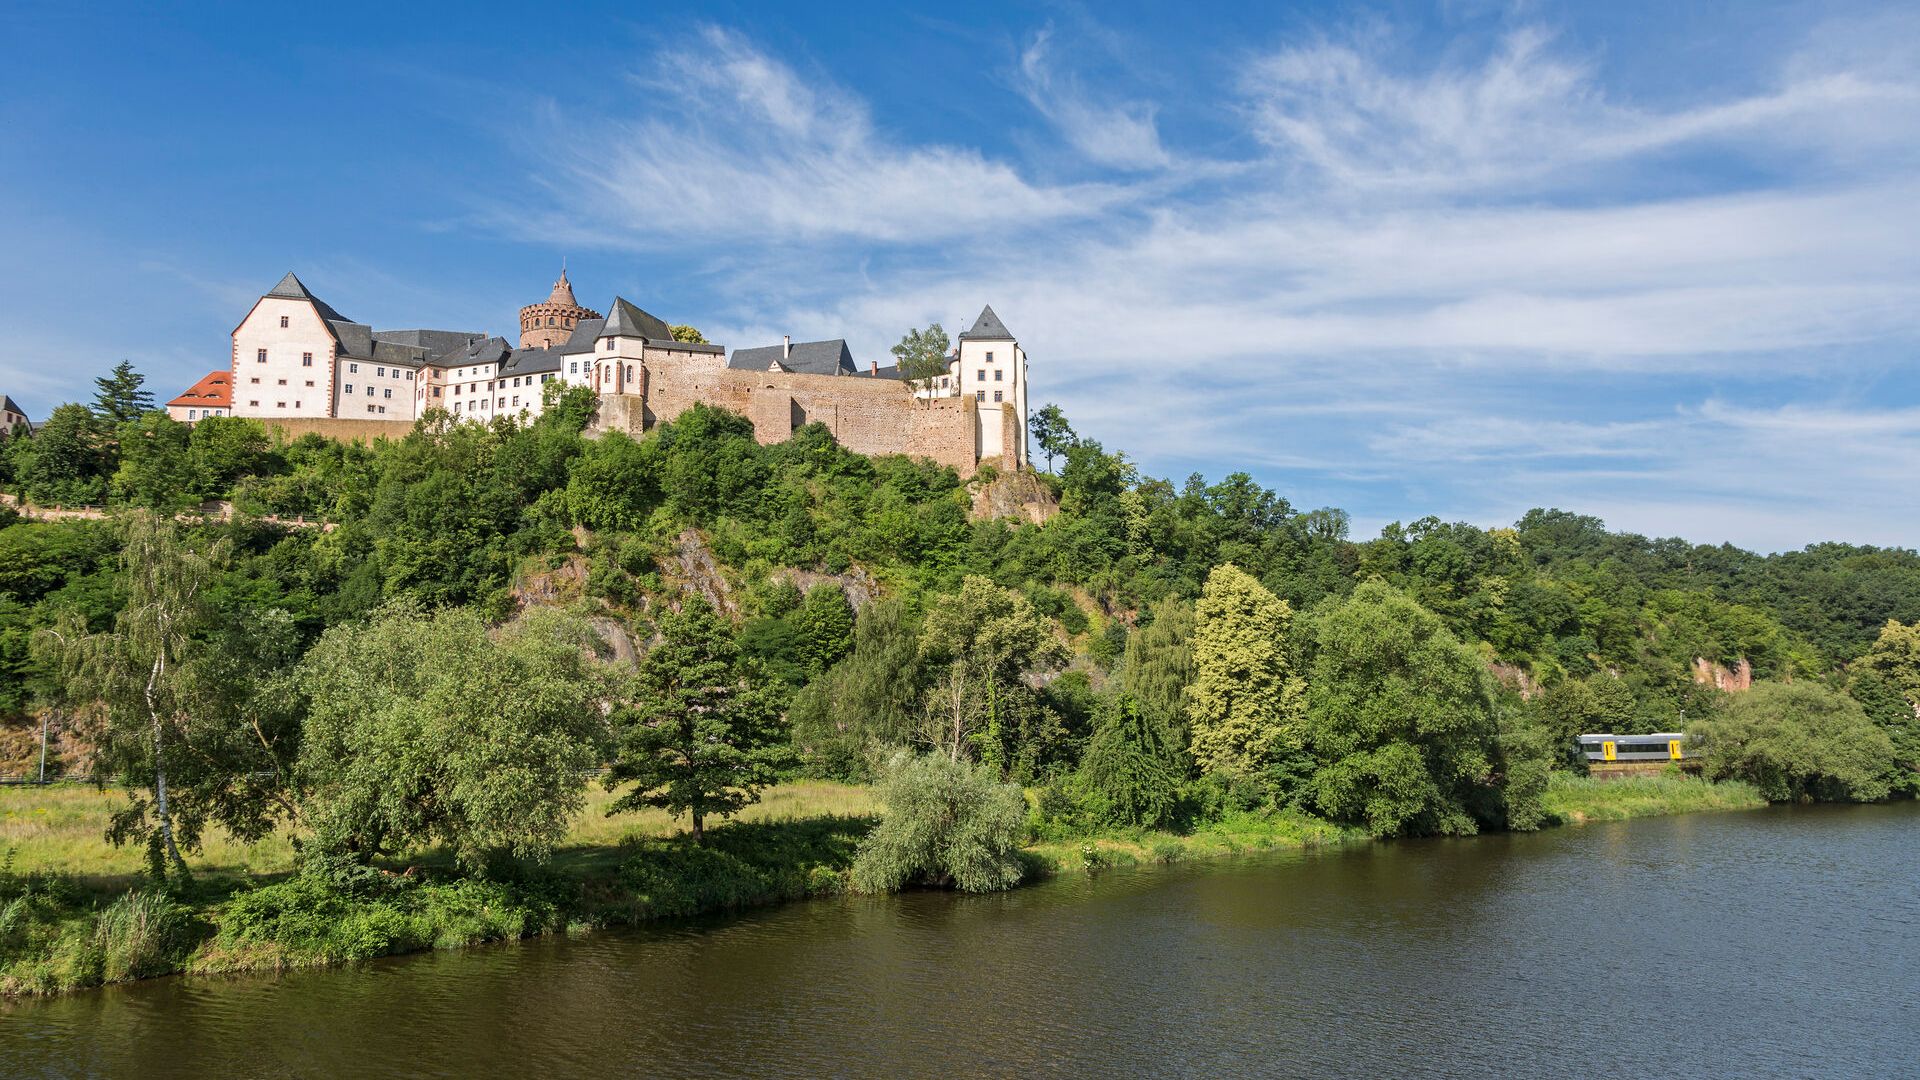 The picturesque Mildenstein Castle on the banks of the river Mulde in Leisnig.